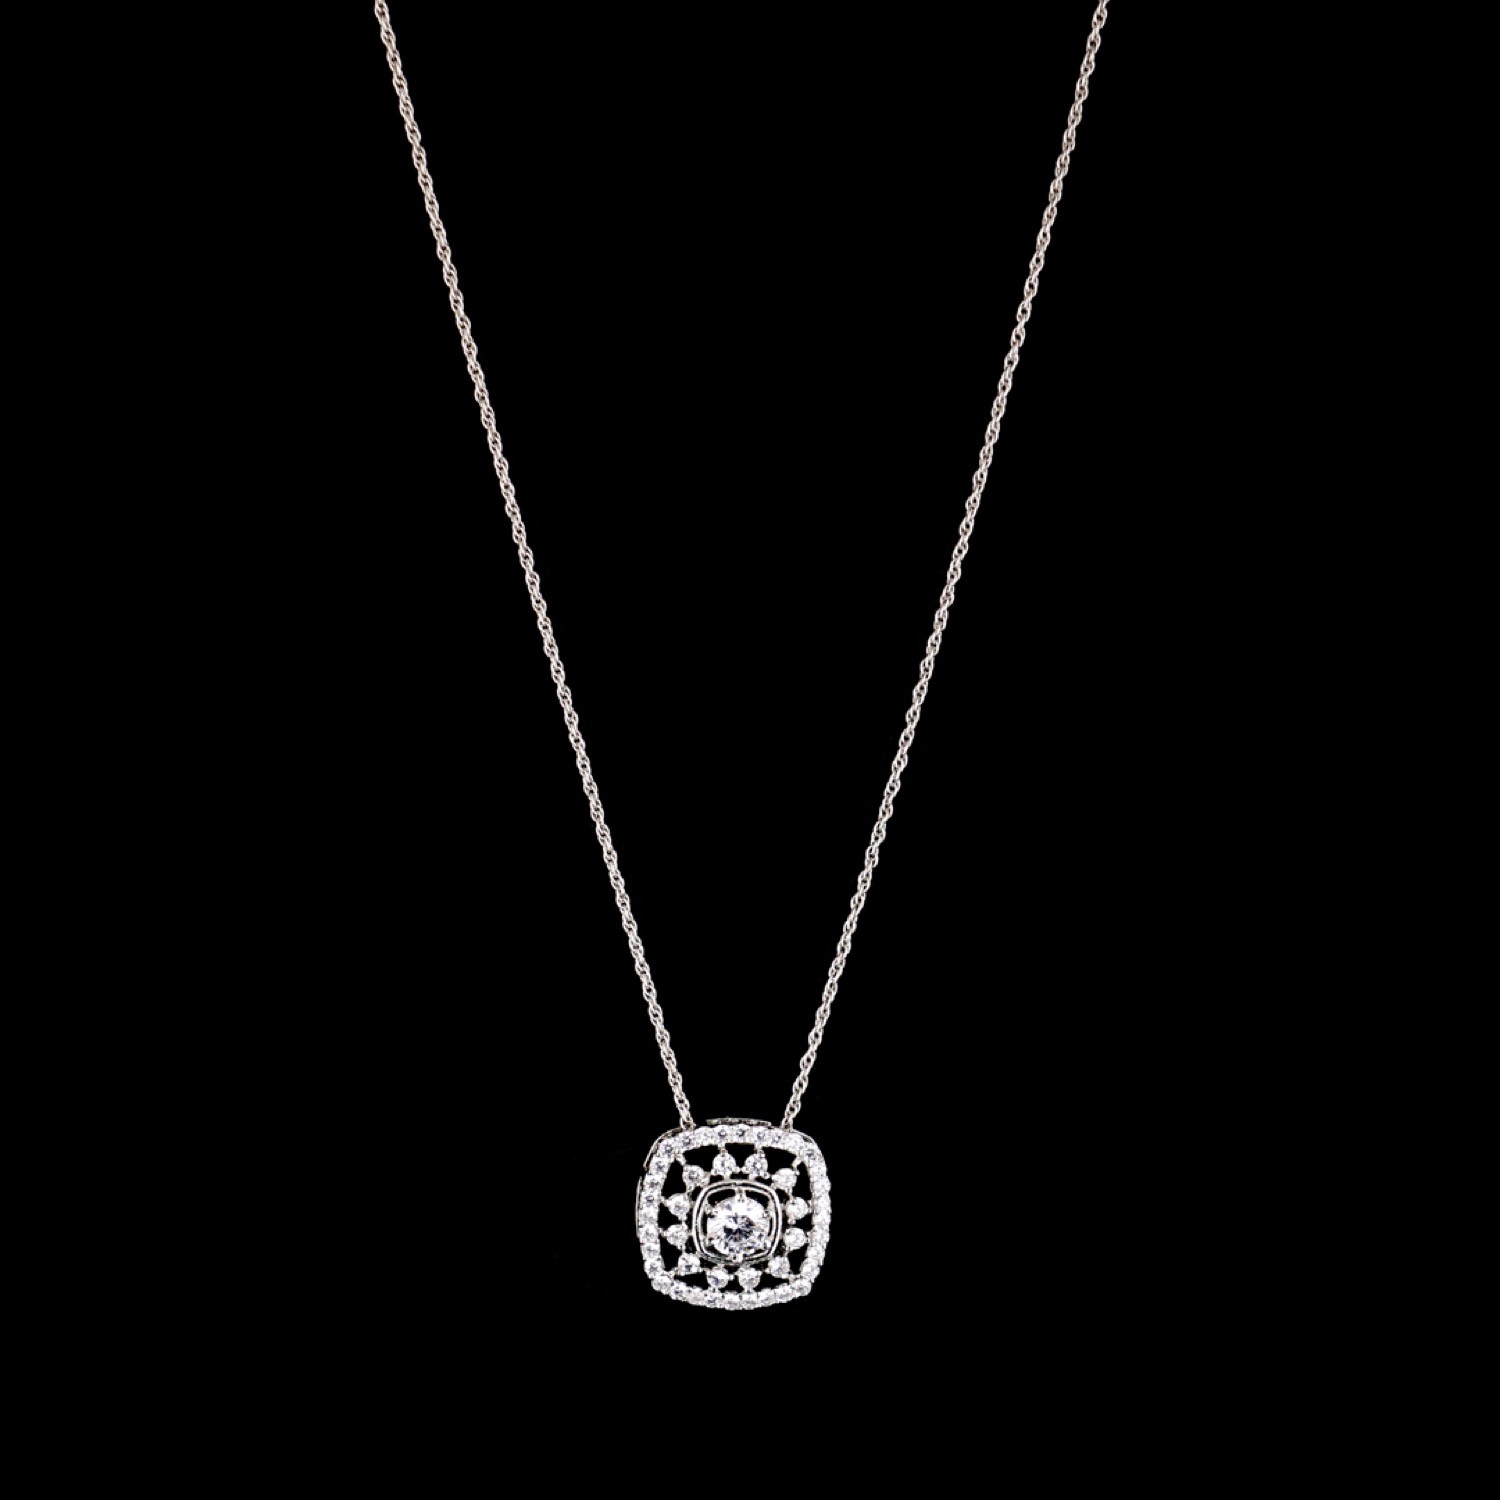 varam_chains_square_shaped_white_stone_pendant_with_silver_chain-1